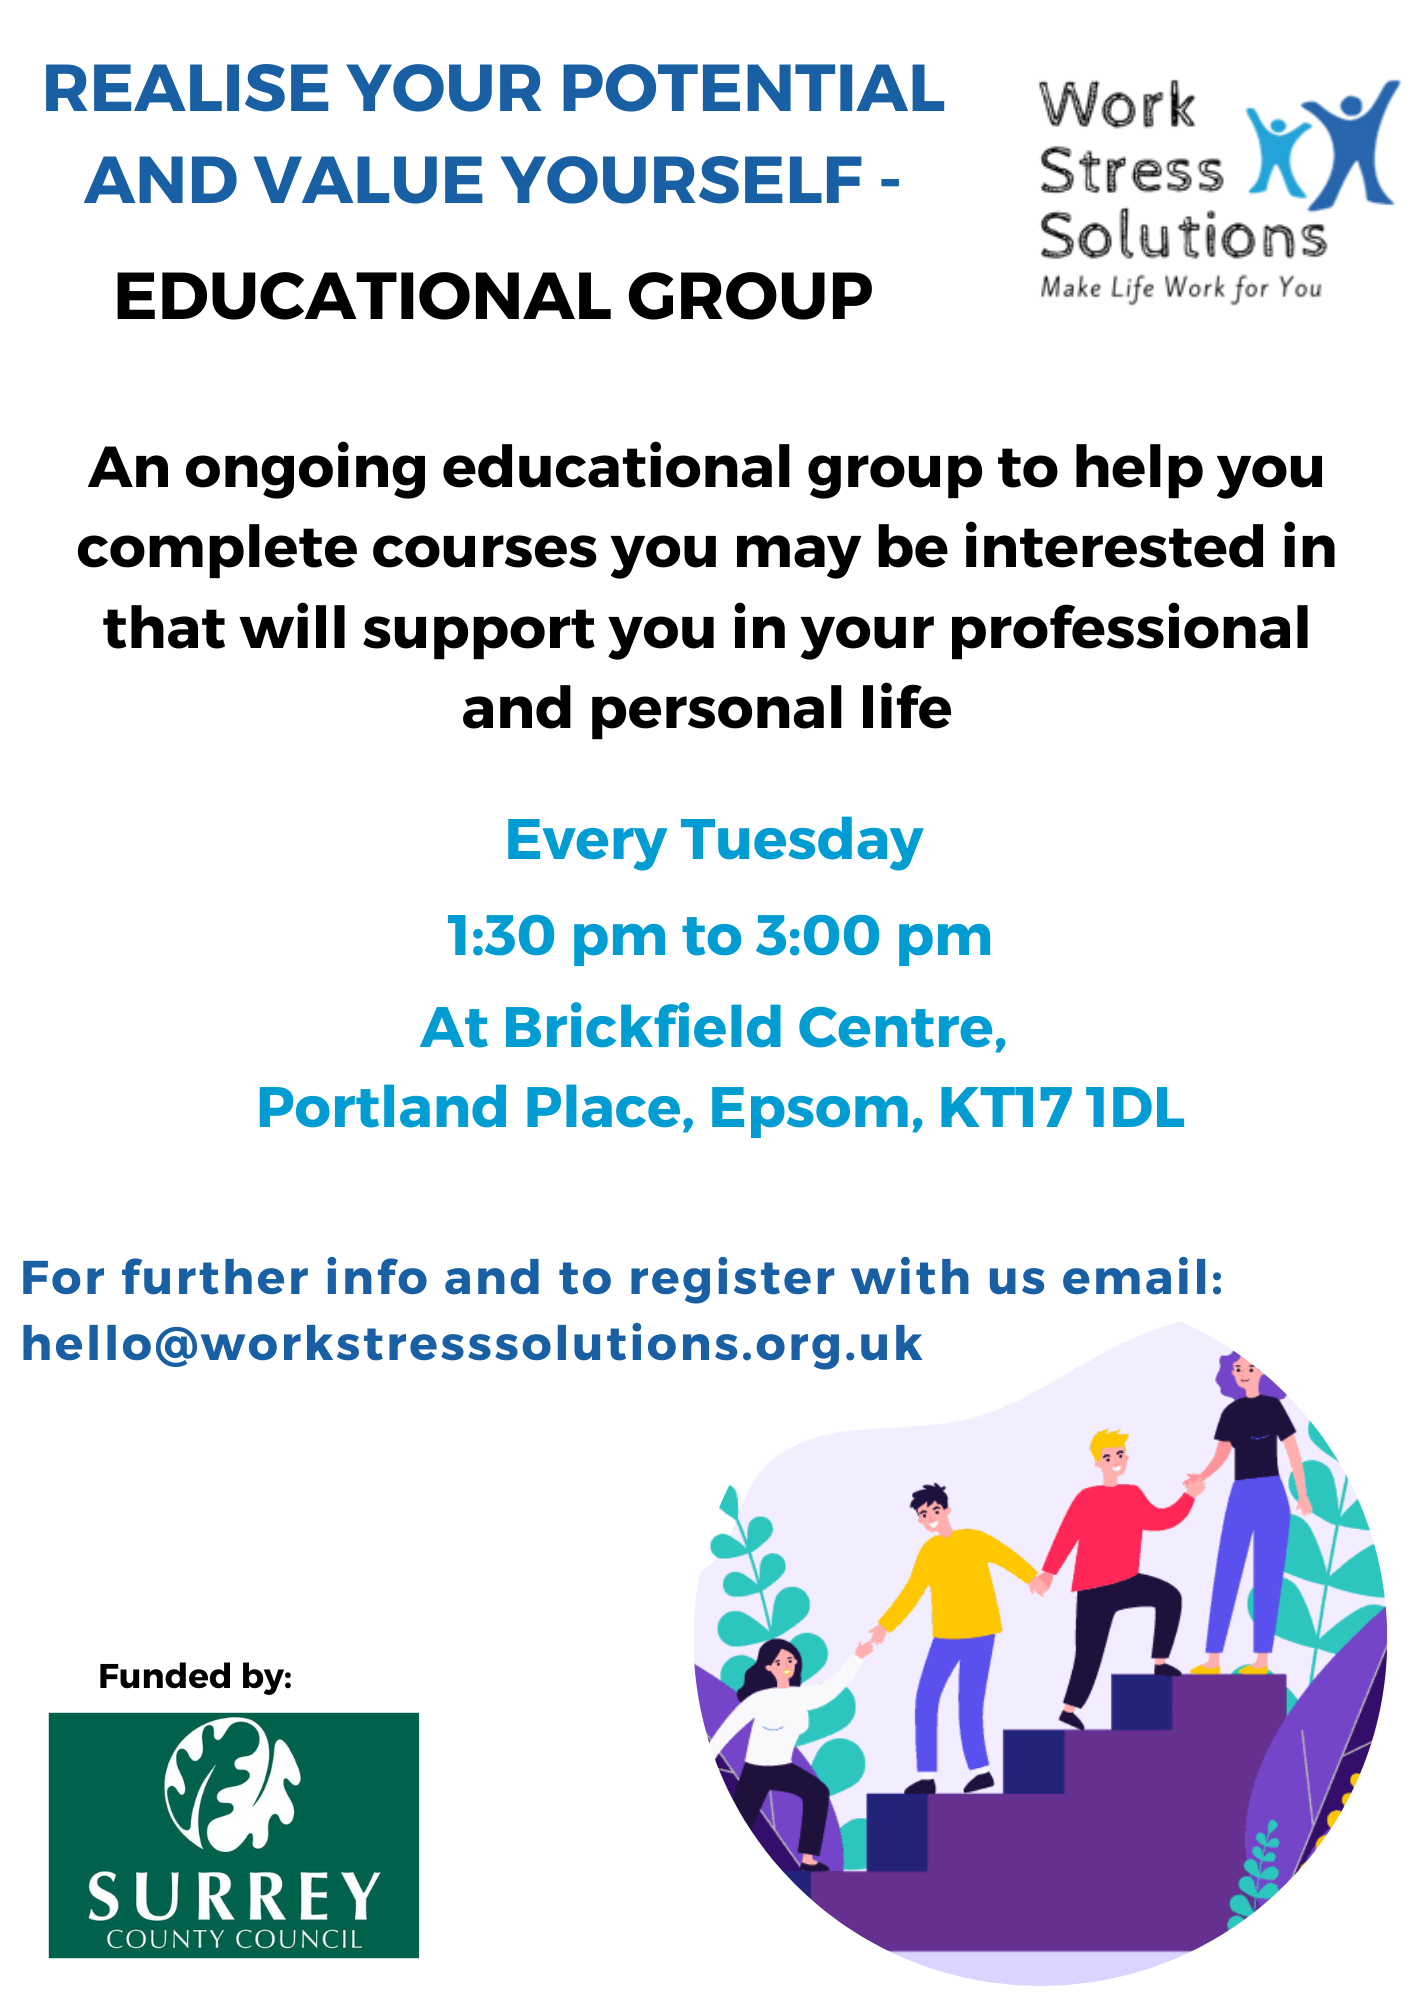 An ongoing educational group to help you complete courses you may be interested in that will support you in your professional and personal life. Every Tuesday 1:30 pm to 3:00 pm At Brickfield Centre, Portland Place, Epsom, KT17 1DL For further info and to register with us email: hello@workstresssolutions.org.uk